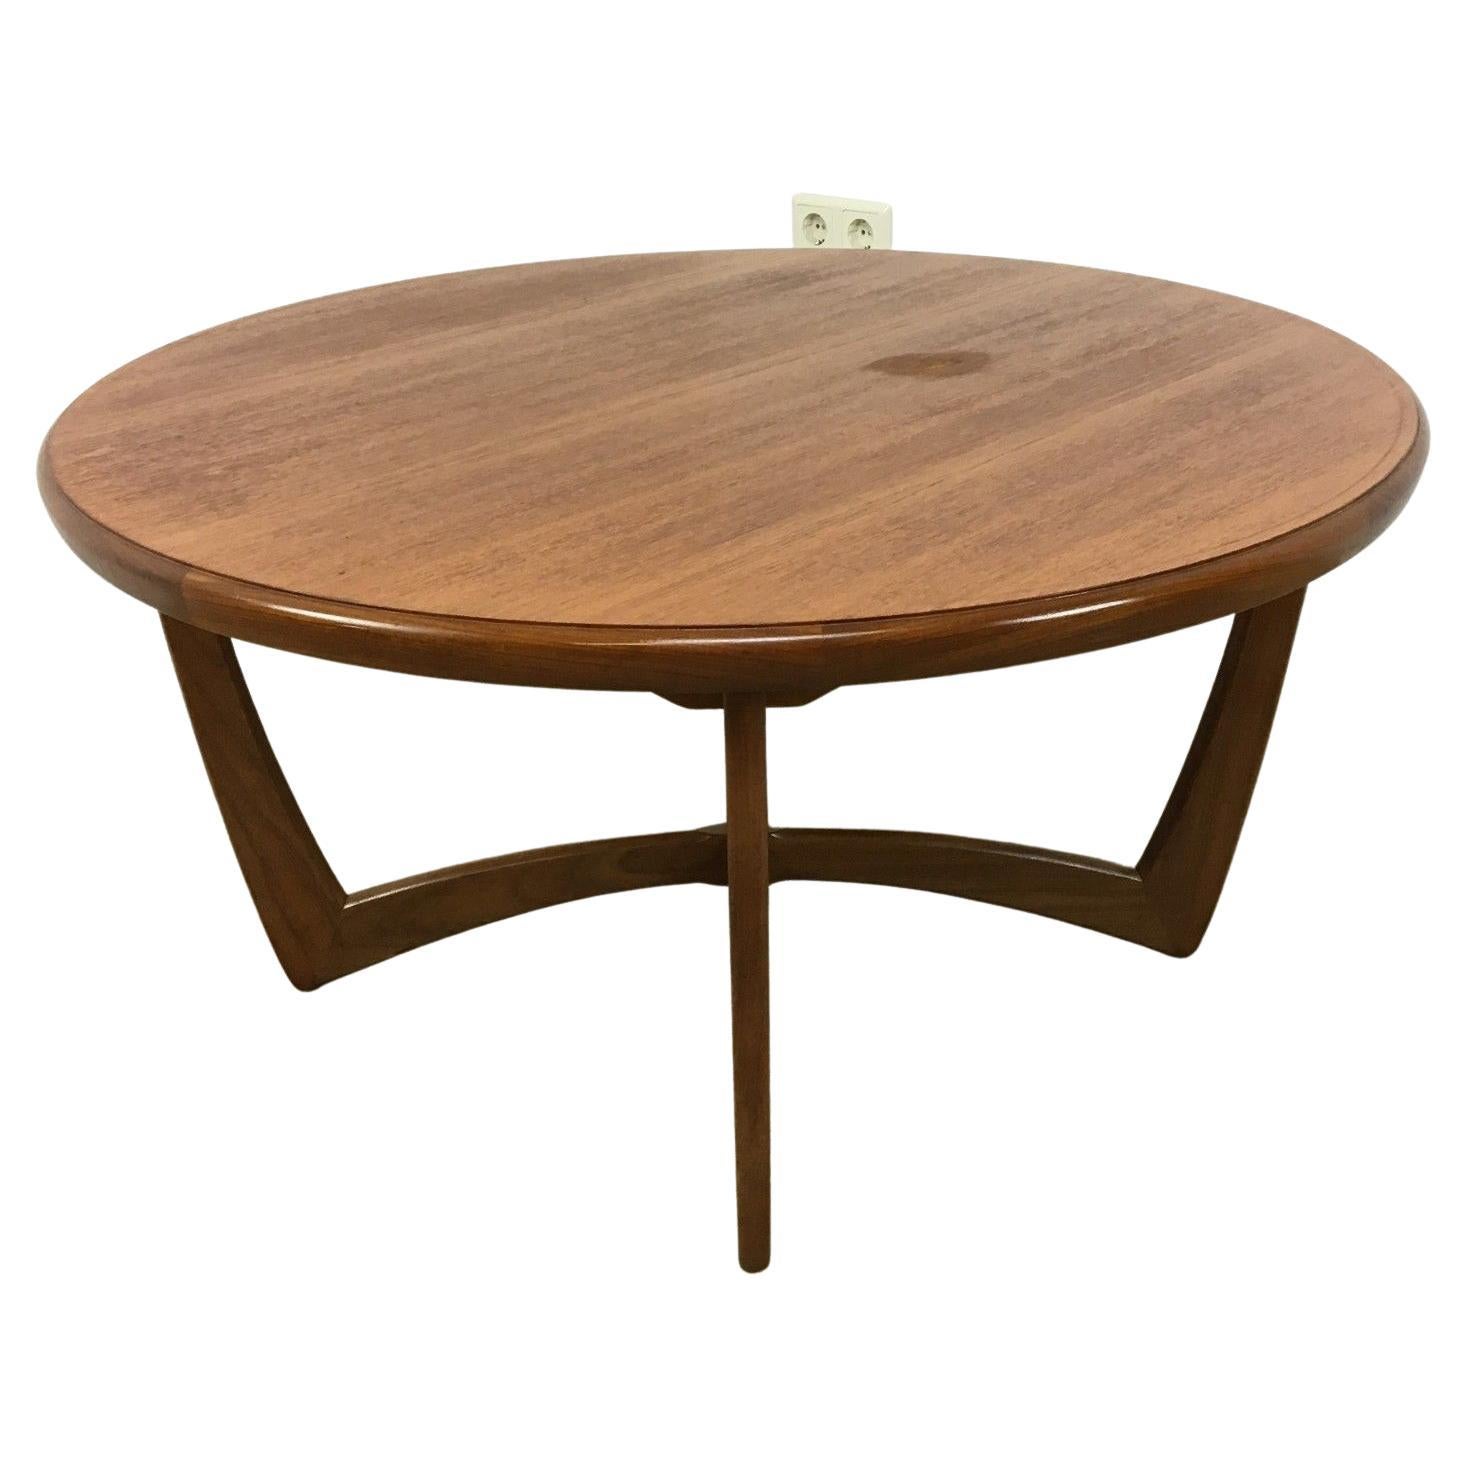 70s teak side table coffee table Danish Modern Design Denmark

Object: coffee table

Manufacturer:

Condition: vintage

Age: around 1960-1970

Dimensions:

Diameter = 100cm
Height = 52cm

Other notes:

Veneer damage - see